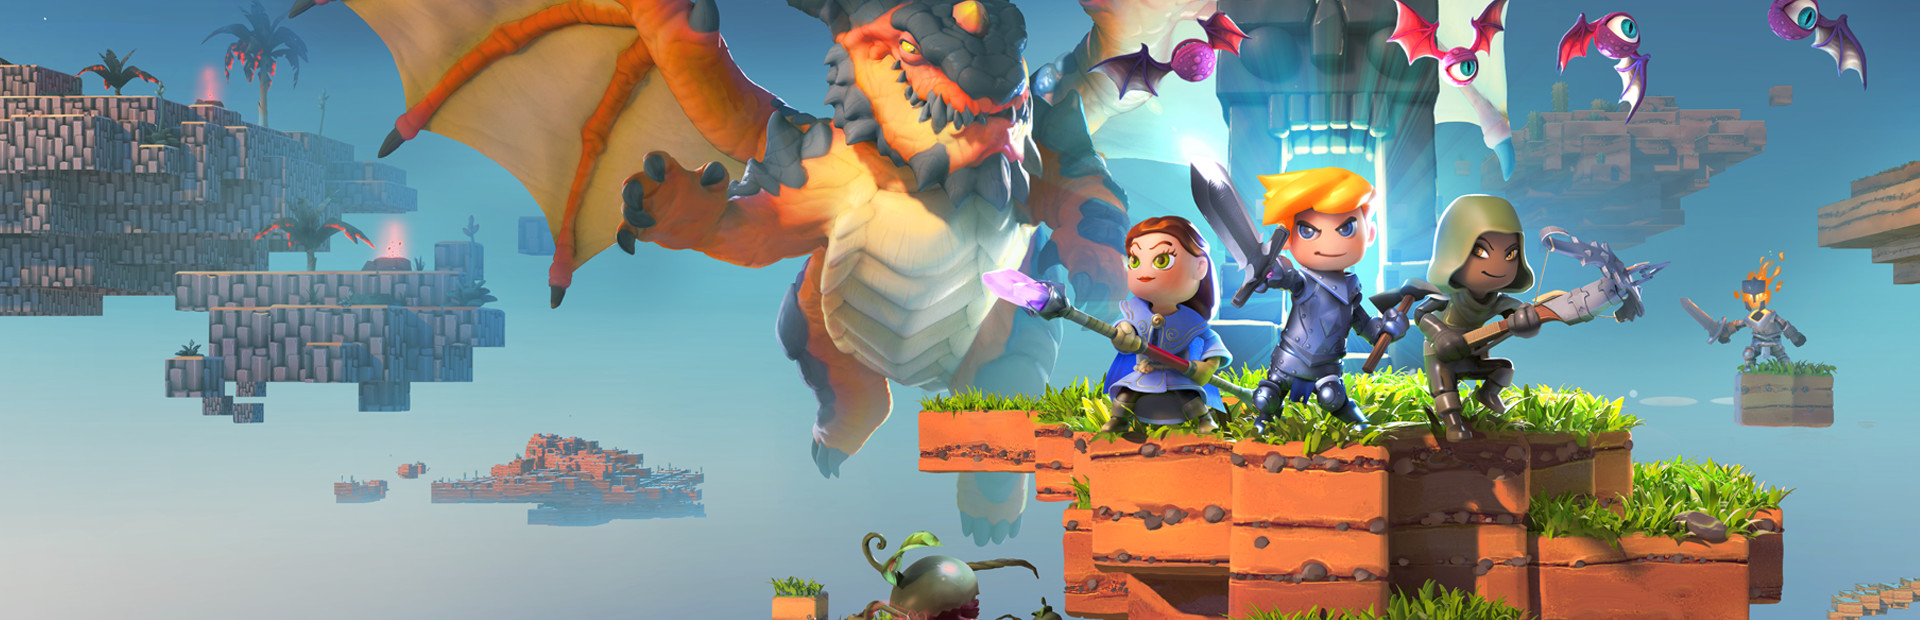 Portal Knights cover image